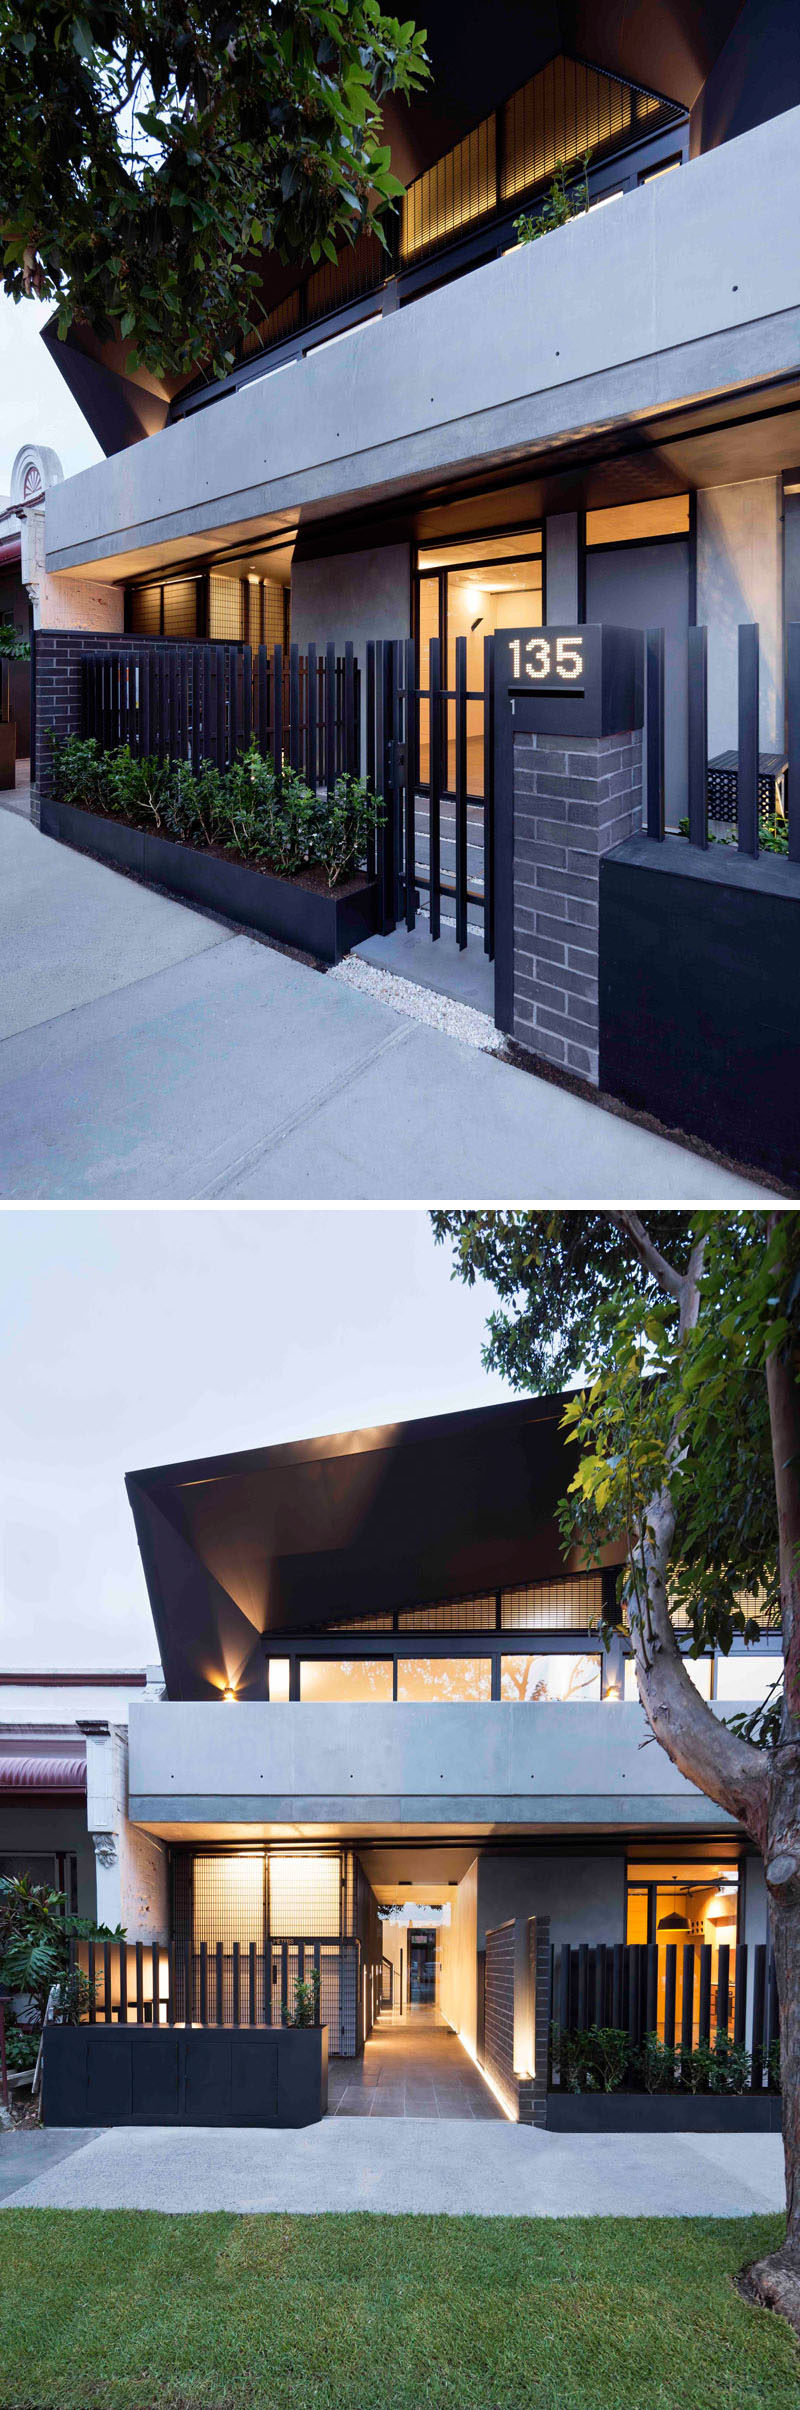 This modern apartment building has a black fence positioned behind planters that add a touch of greenery to the brick and concrete facade.